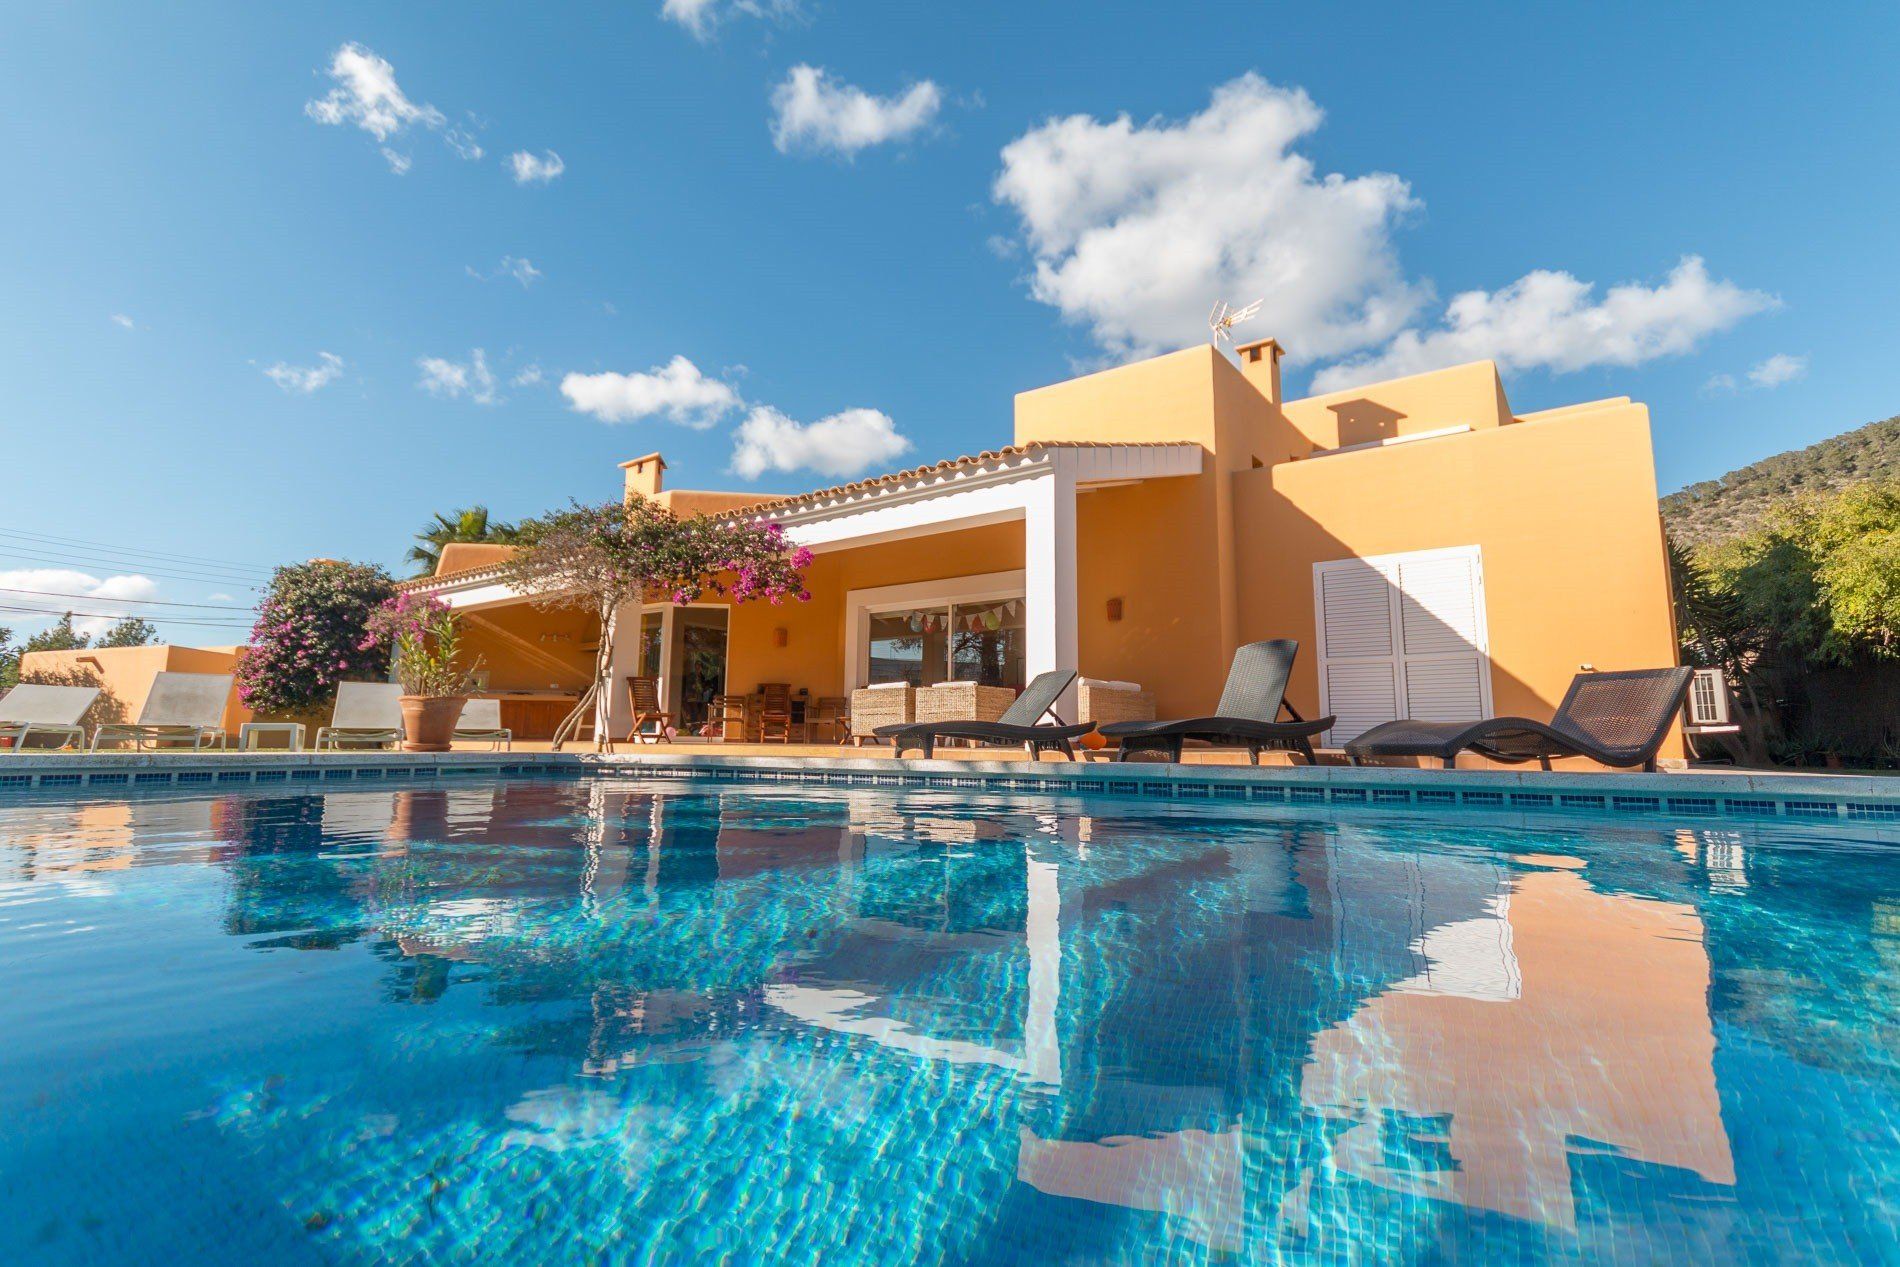 Charming villa in the most popular area of Ibiza